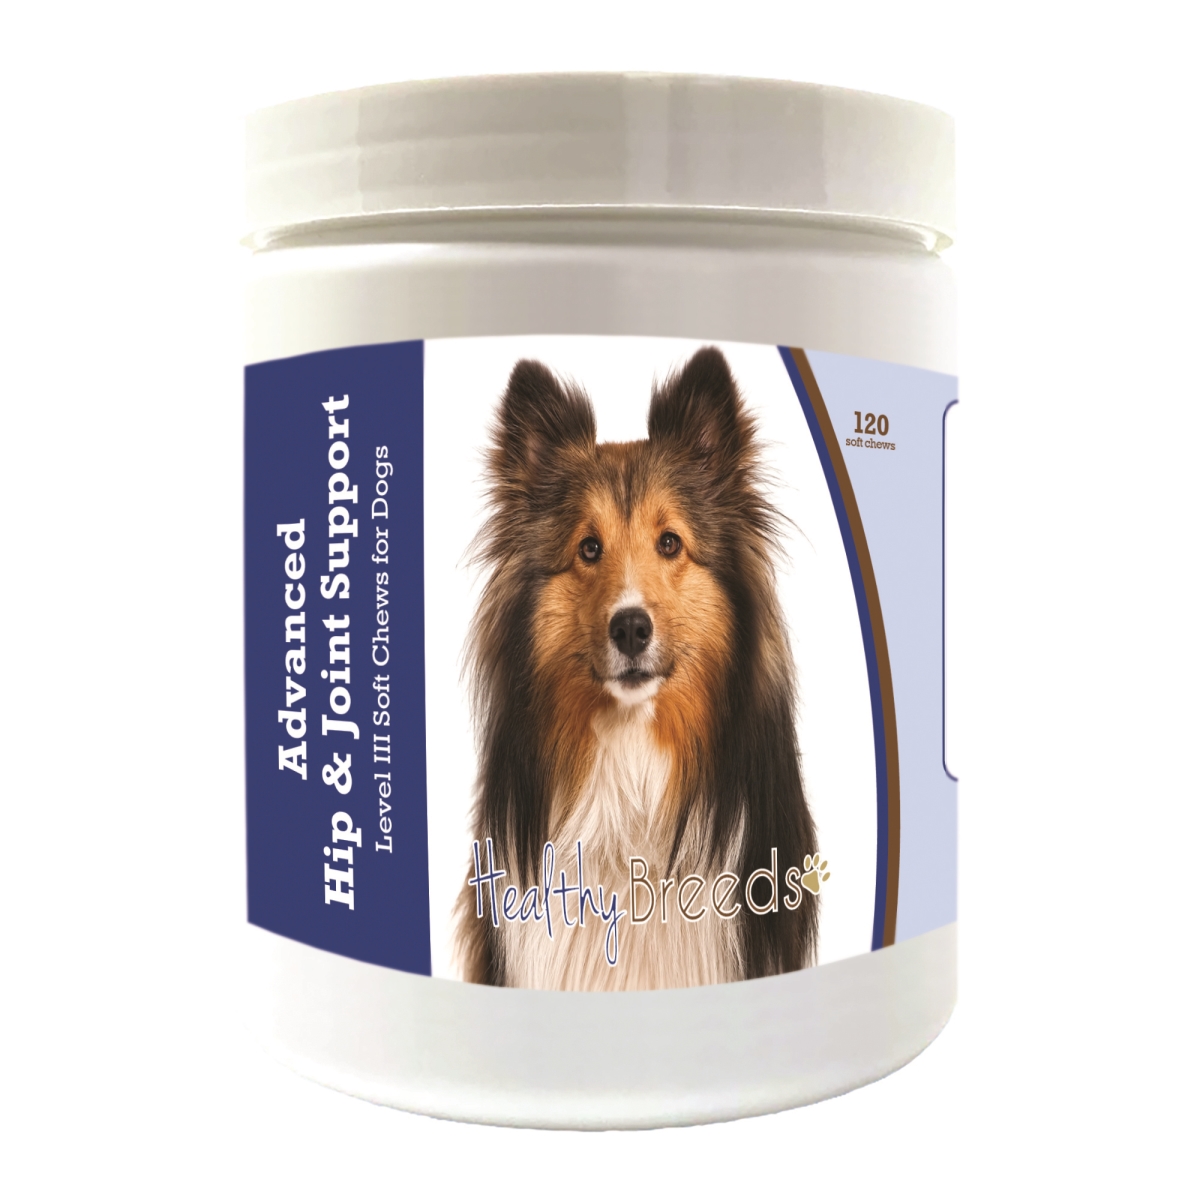 Picture of Healthy Breeds 192959899221 Shetland Sheepdog Advanced Hip & Joint Support Level III Soft Chews for Dogs